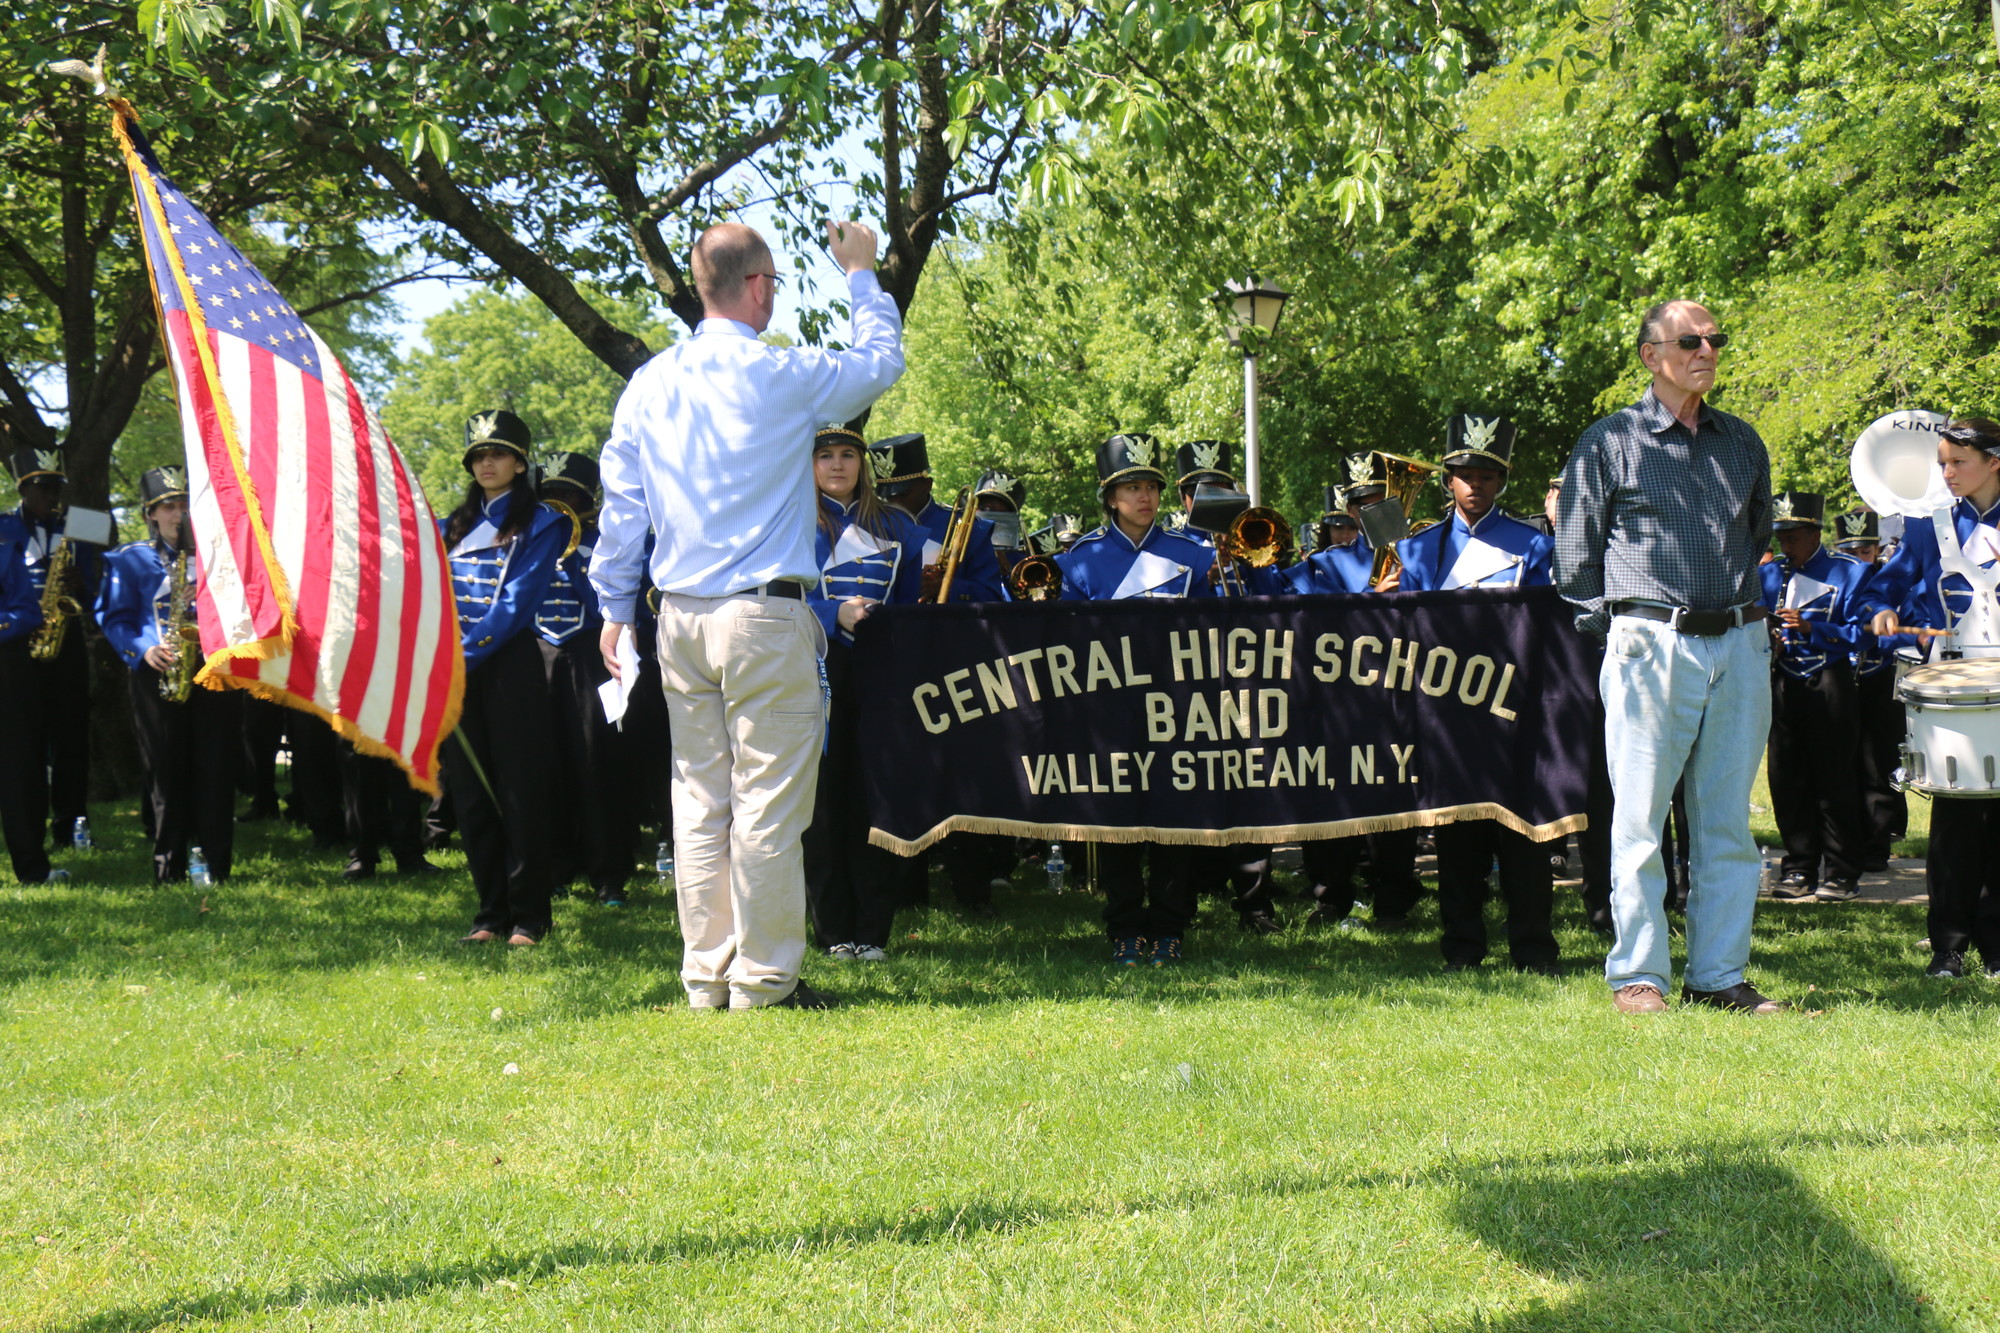 The Central High School Band, led by director Douglas Coleman, played the national anthem during the ceremony.